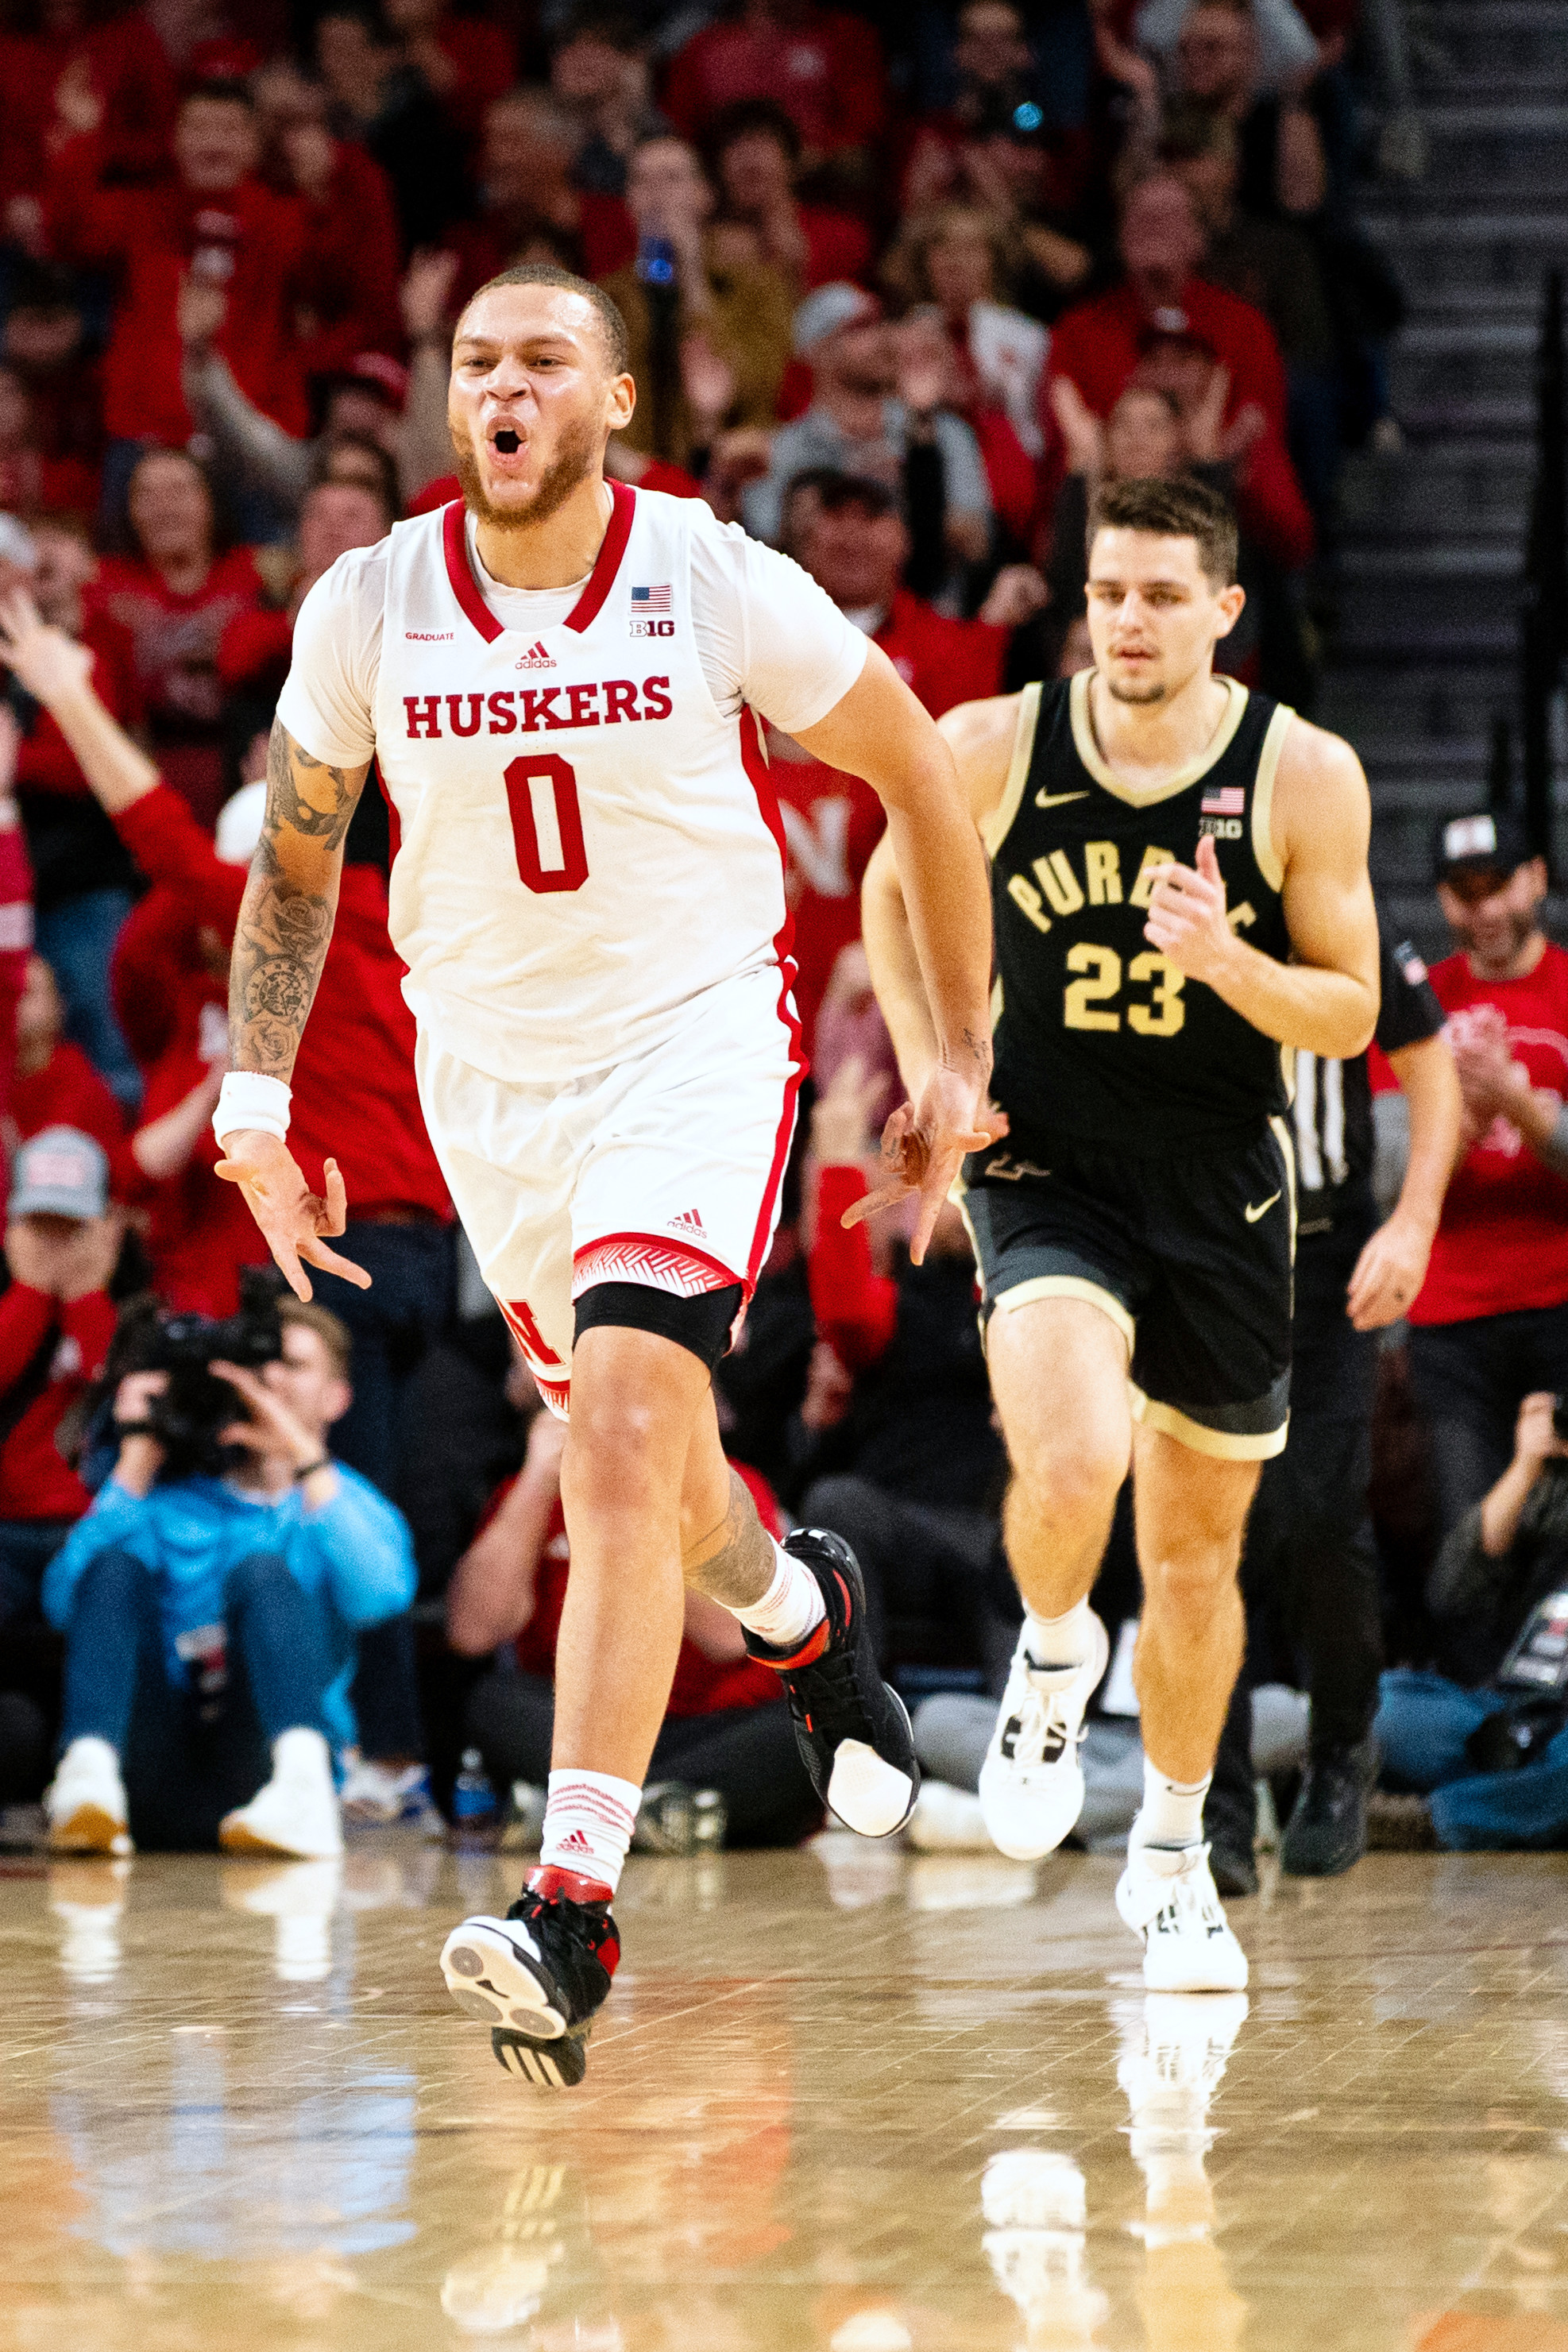 Nebraska guard C.J. Wilcher celebrates after sinking a a three-point shot during the second half Tuesday night against Purdue at Pinnacle Bank Arena in Lincoln. (Jan 9, 2024)